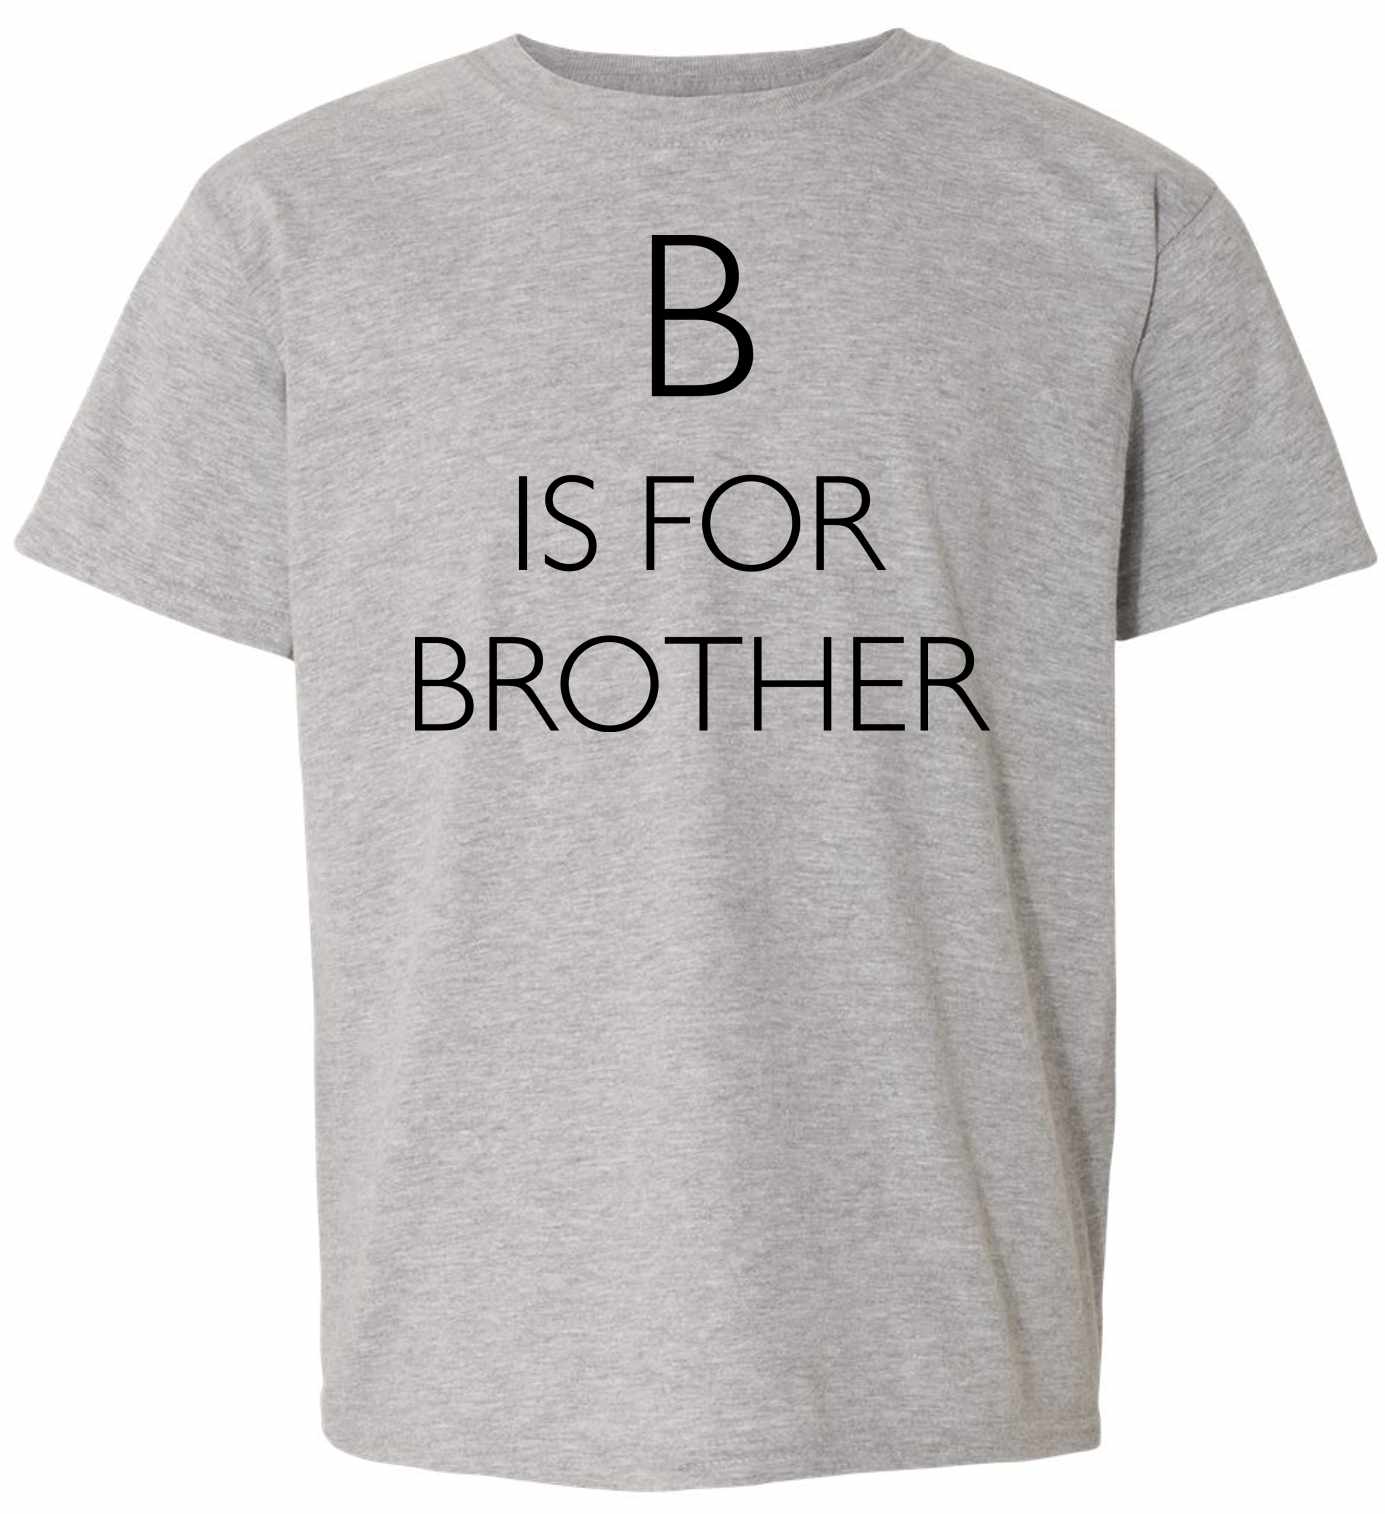 B is for Brother on Youth T-Shirt (#1009-201)